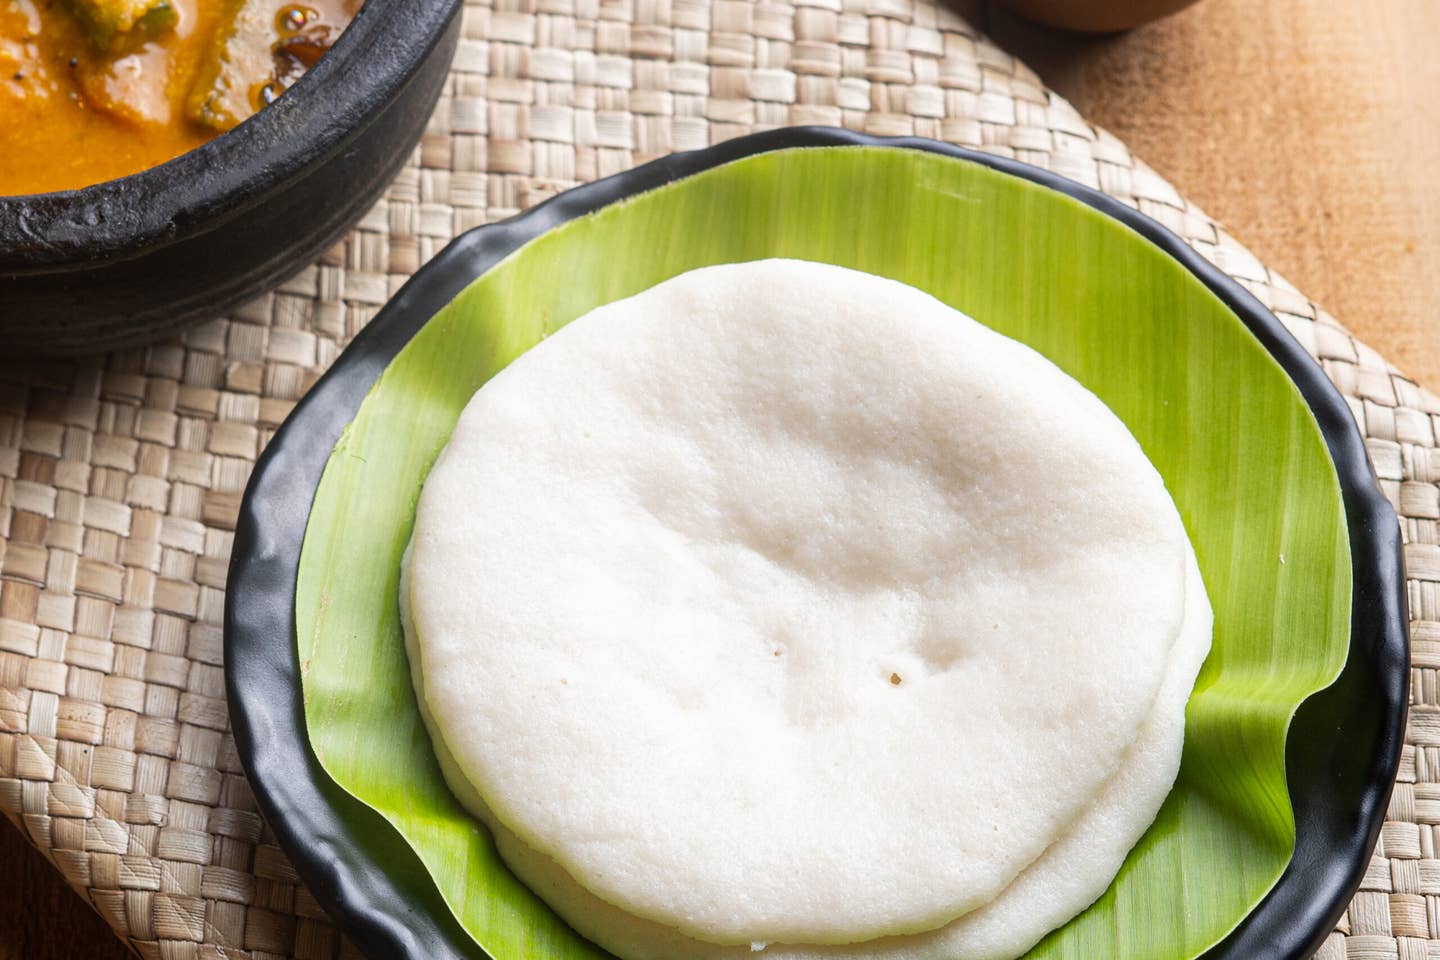 The Revival of an Under-the-Radar Idli from Kerala